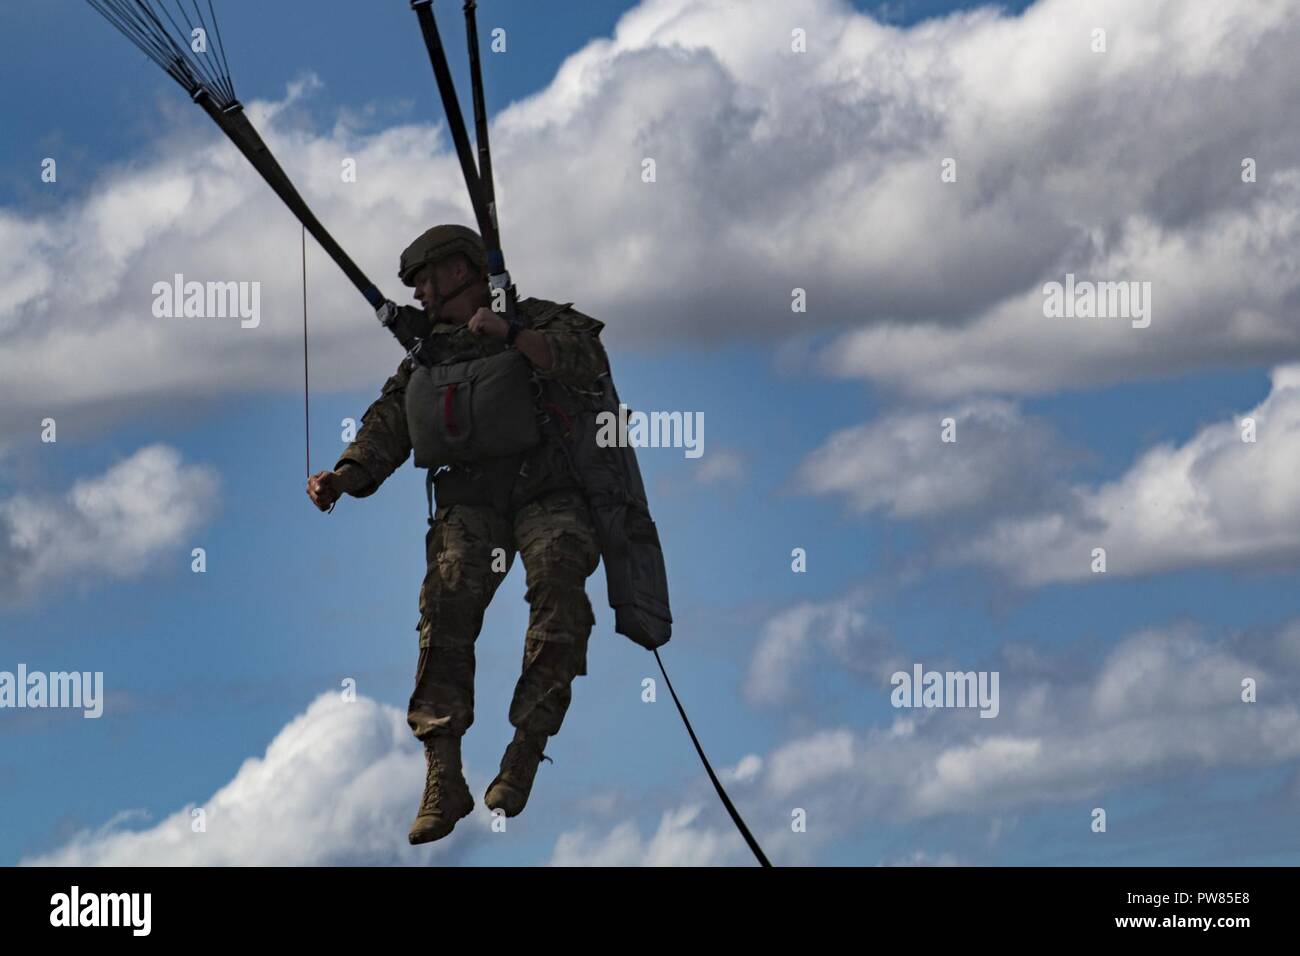 A member of the 820th Base Defense Group descends during a static-line jump, Oct. 3, 2017, at the Lee Fulp drop zone in Tifton, Ga. During a static-line jump, the jumper is attached to the aircraft via the ‘static-line’, which automatically deploys the jumpers’ parachute after they’ve exited the aircraft. Stock Photo